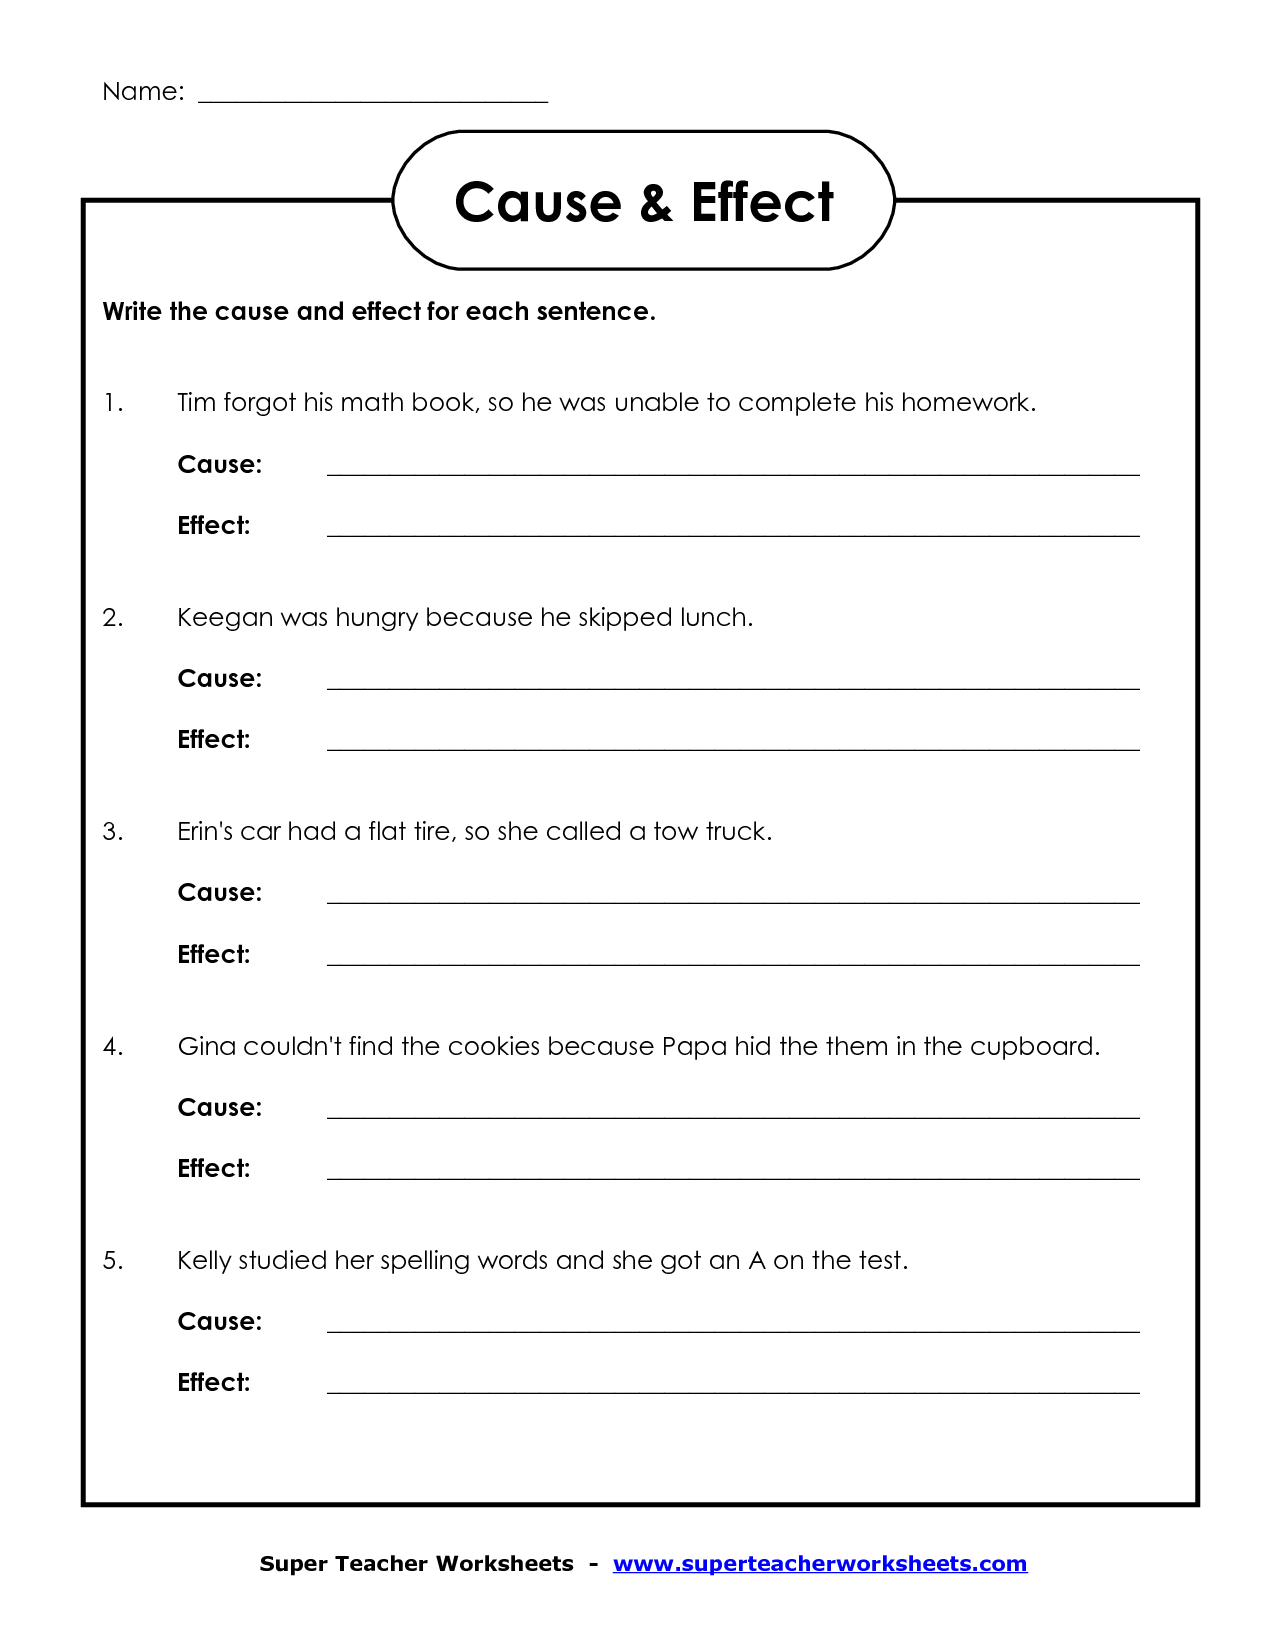 Free Printable Cause And Effect Worksheets For 6th Grade